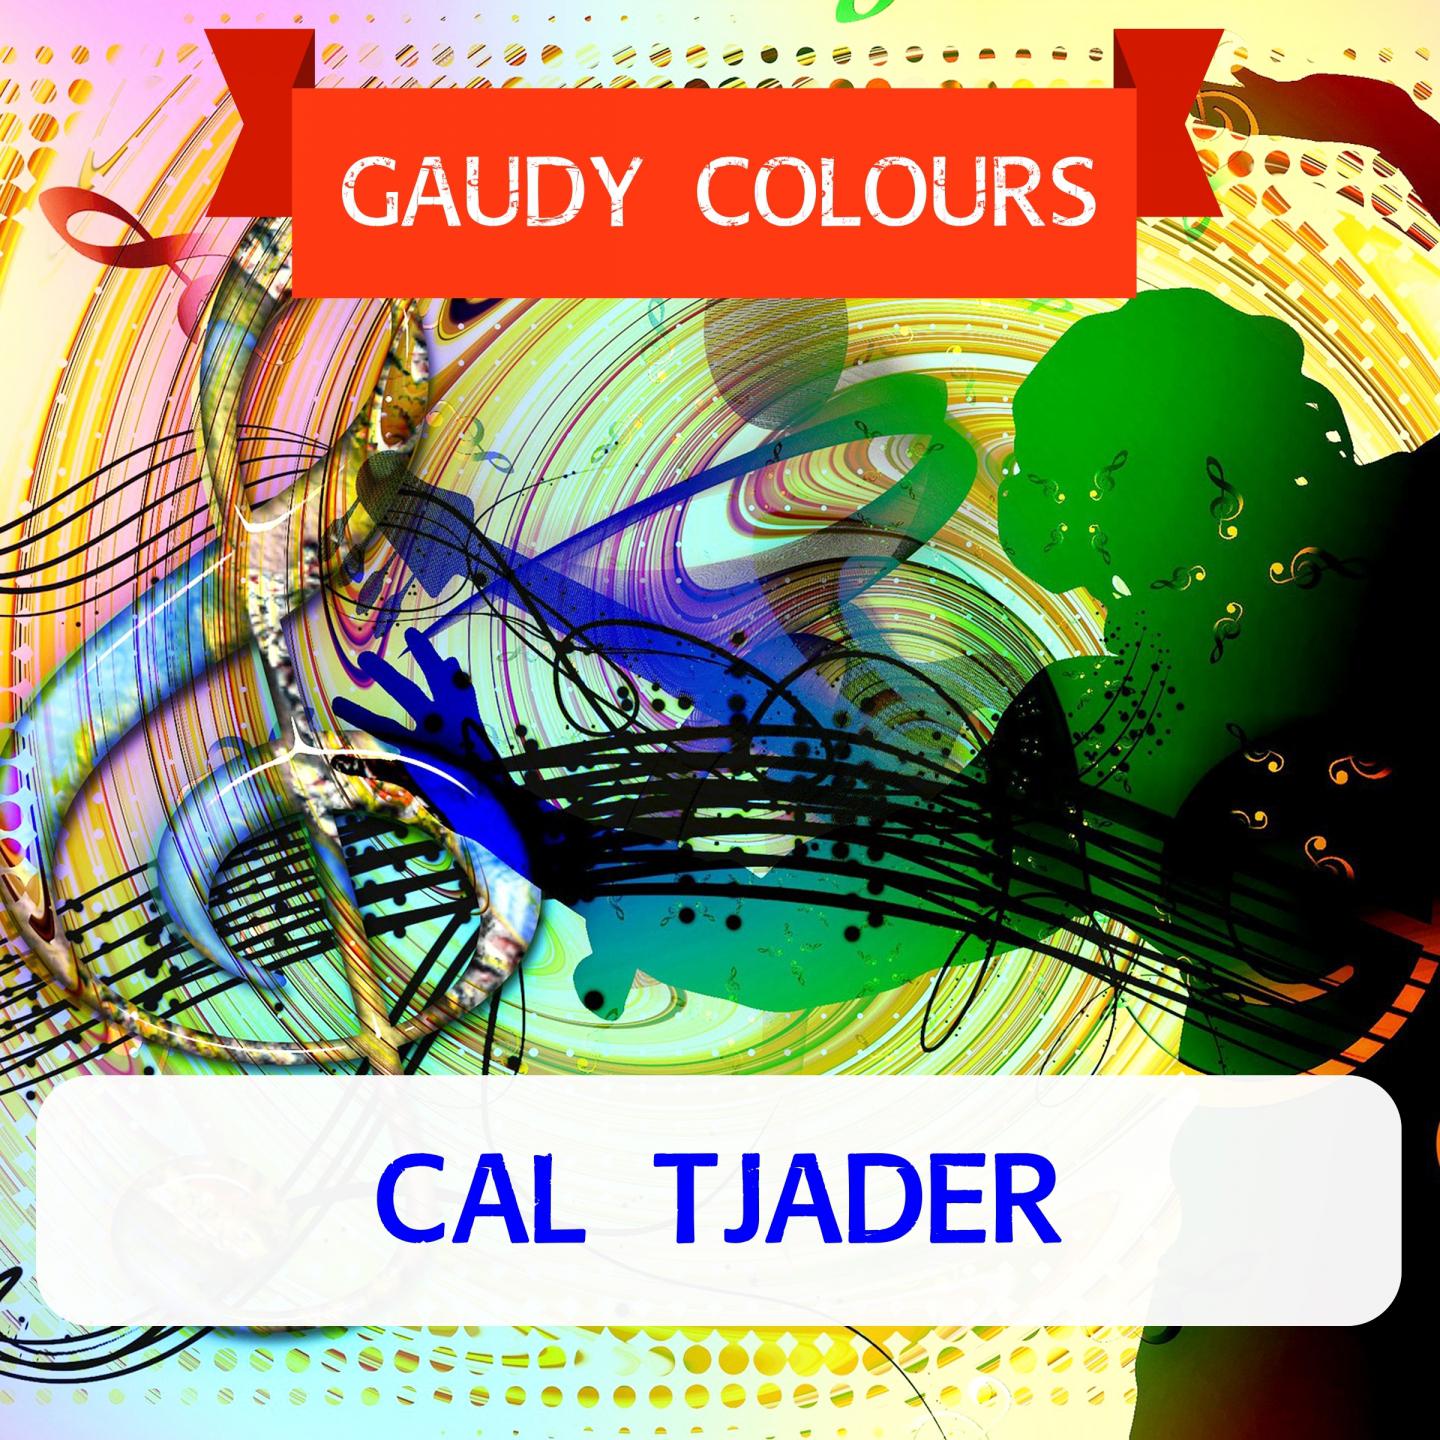 Gaudy Colours